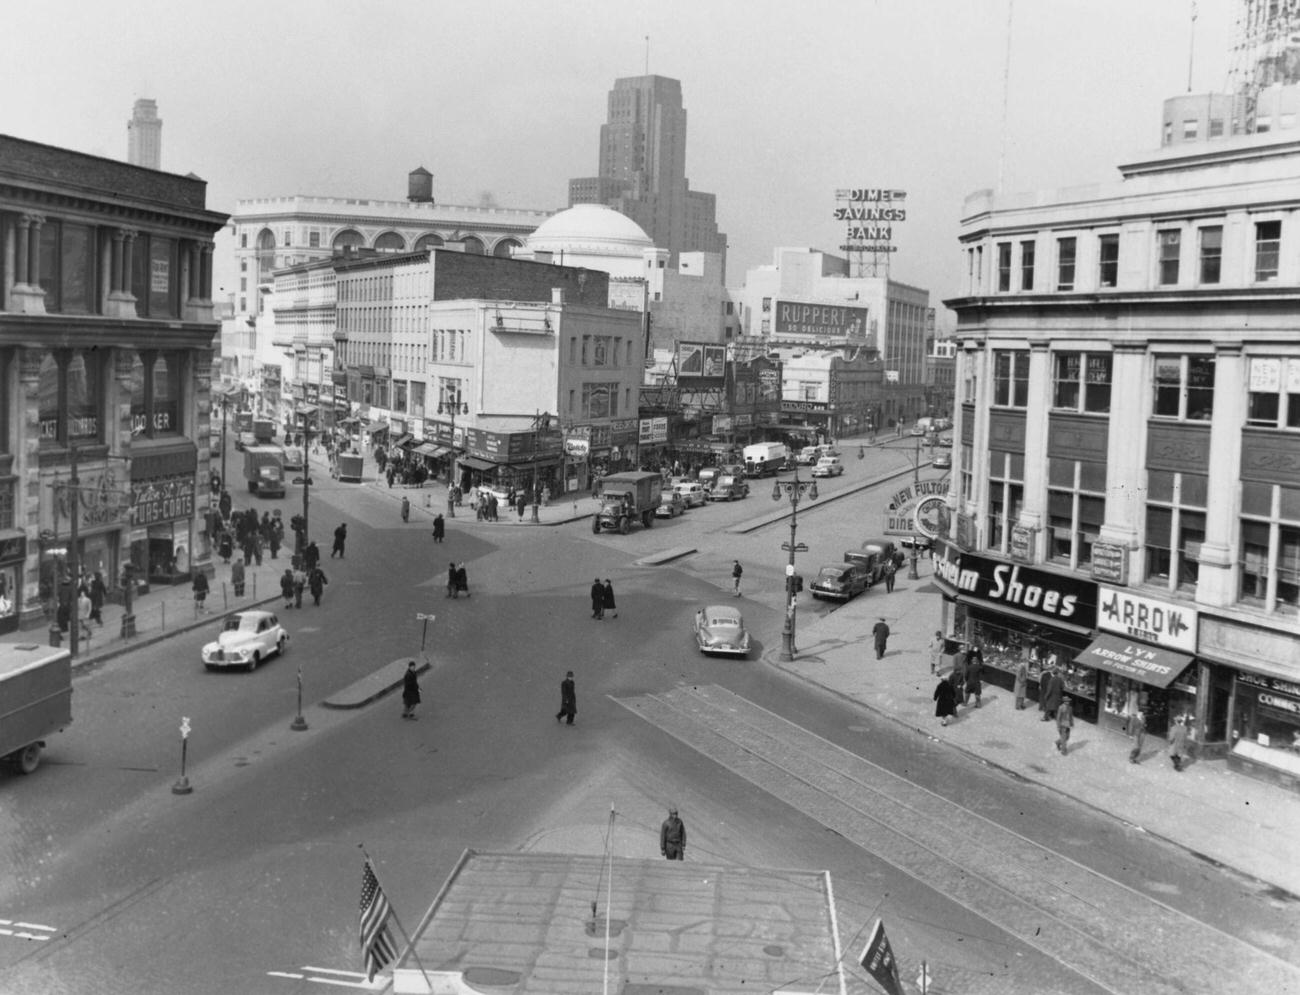 High Angle View Showing Pedestrians And Traffic At The Intersection Of Fulton Street And Flatbush Avenue In Brooklyn, New York City, New York, 1949.